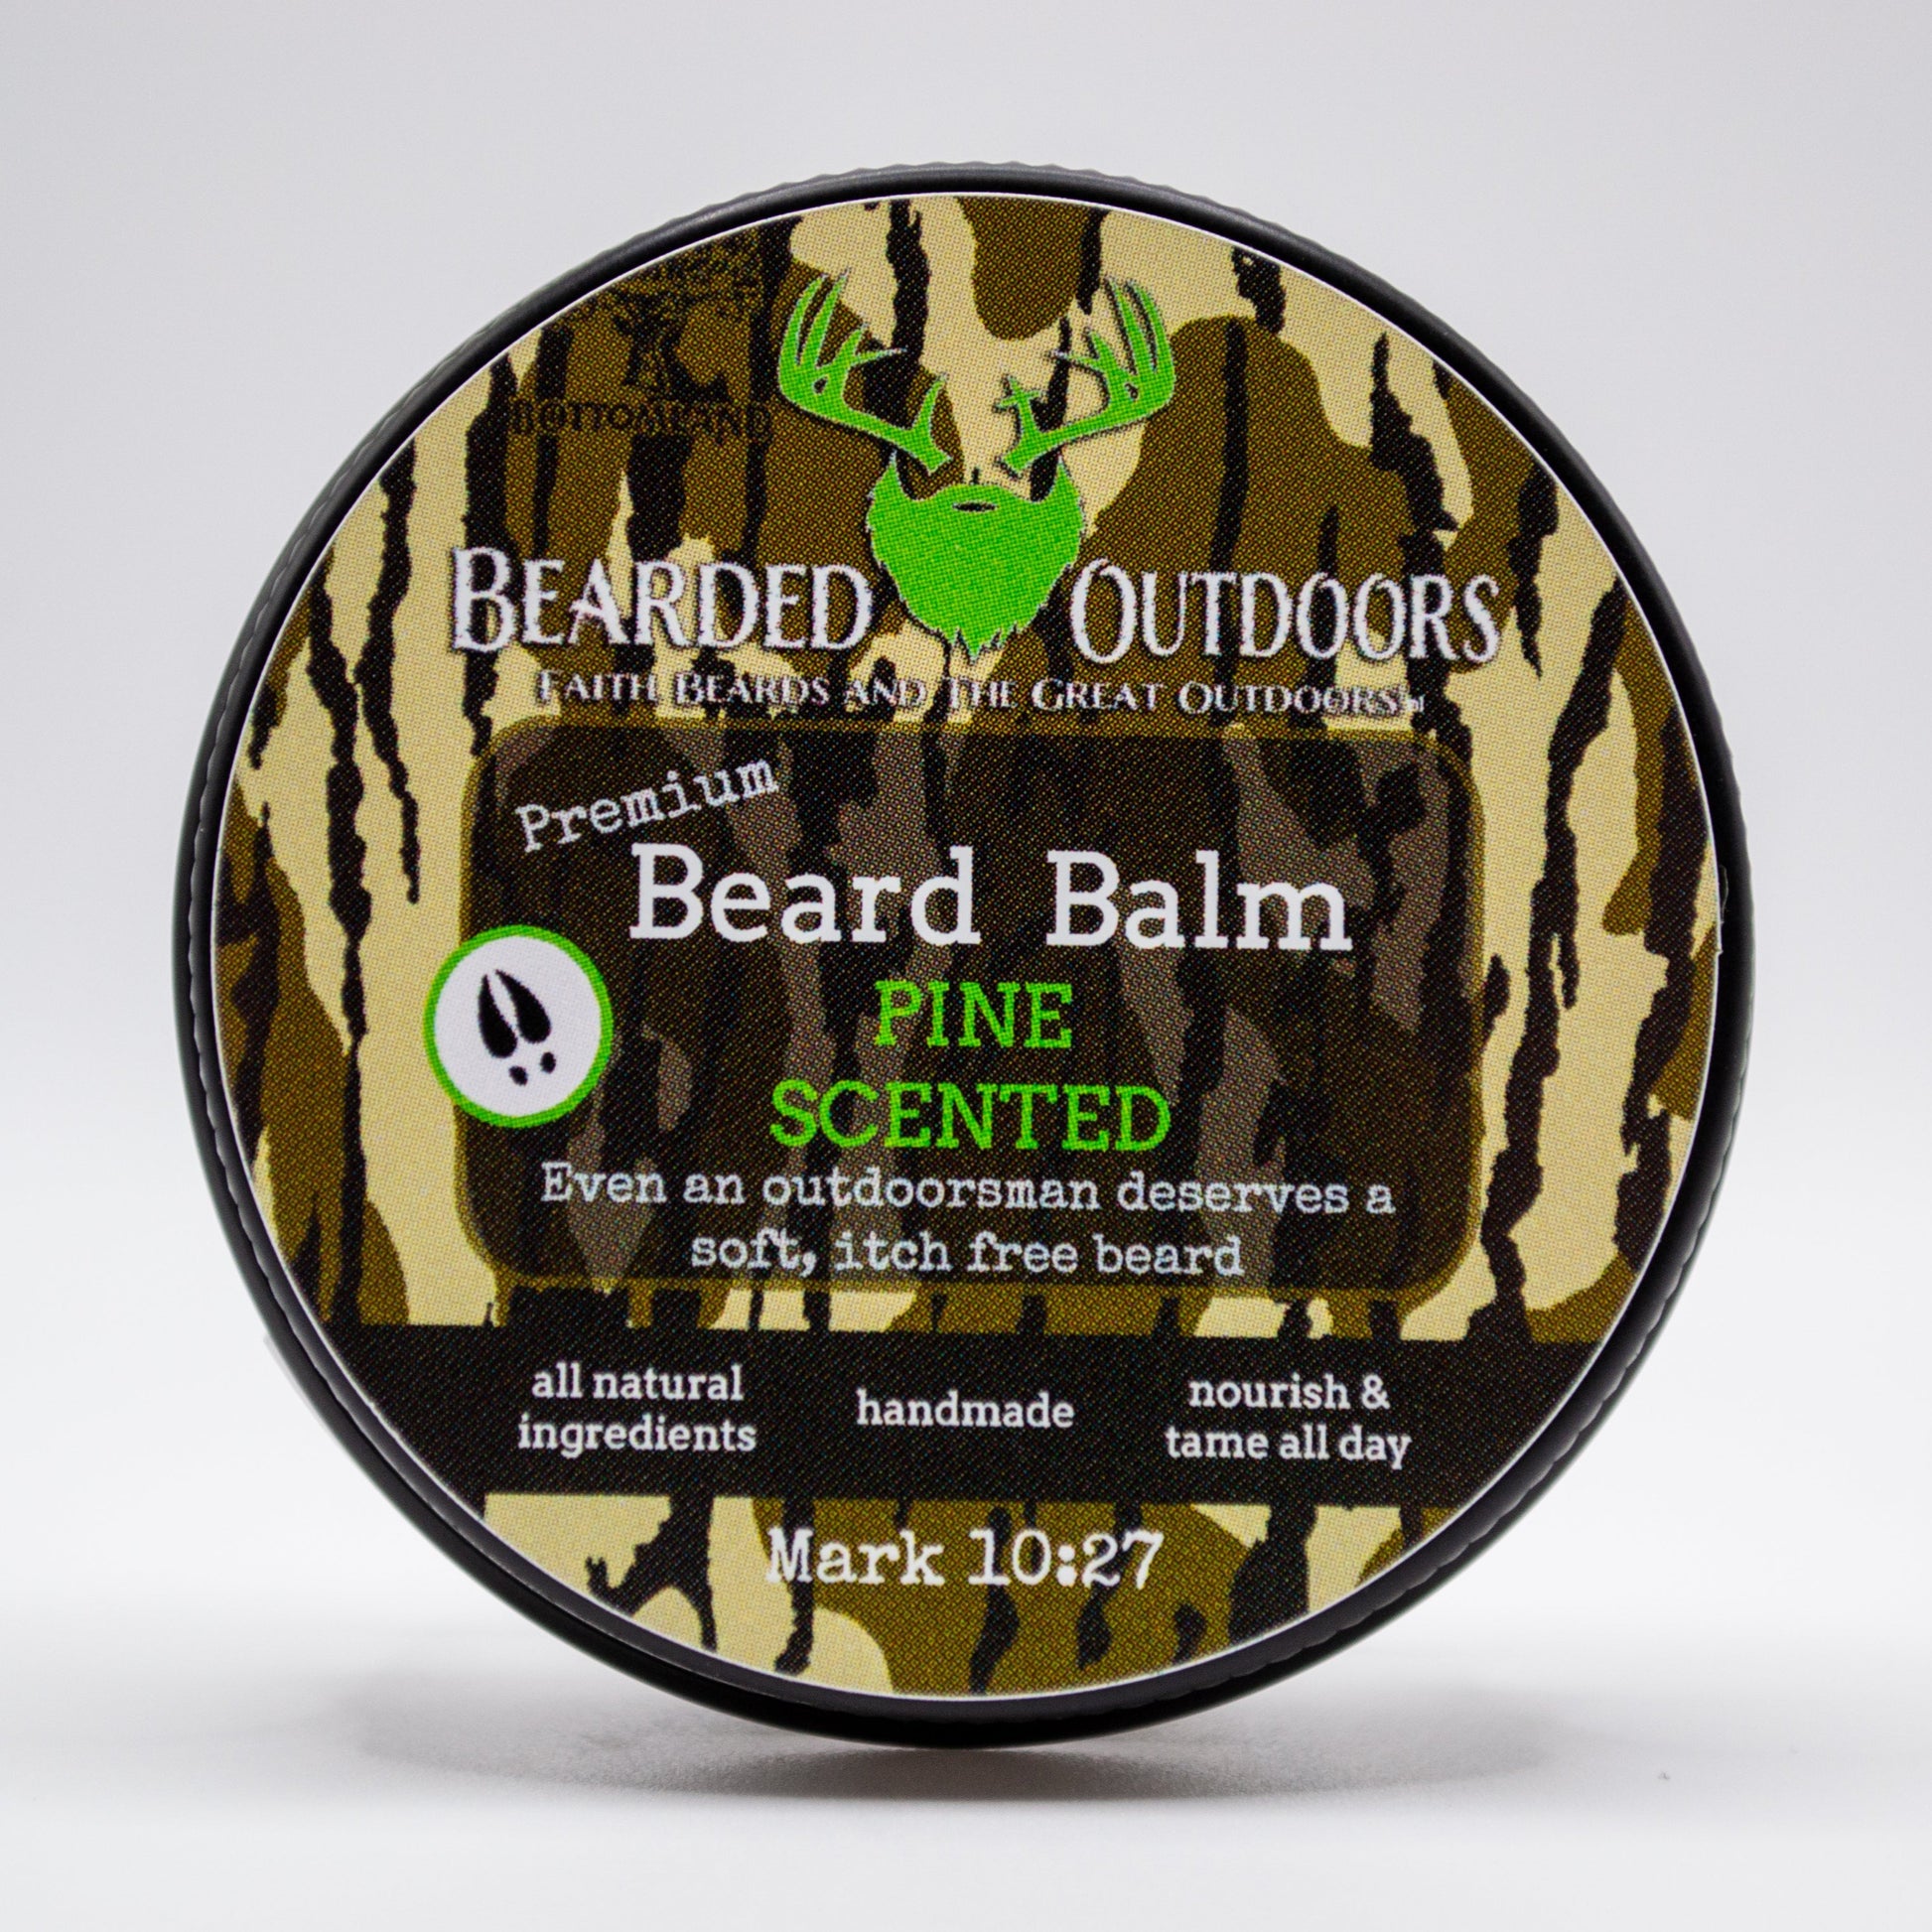 Mossy Oak Pine Scented Premium Beard Balm wrapped in Bottomland Camo by Bearded Outdoors